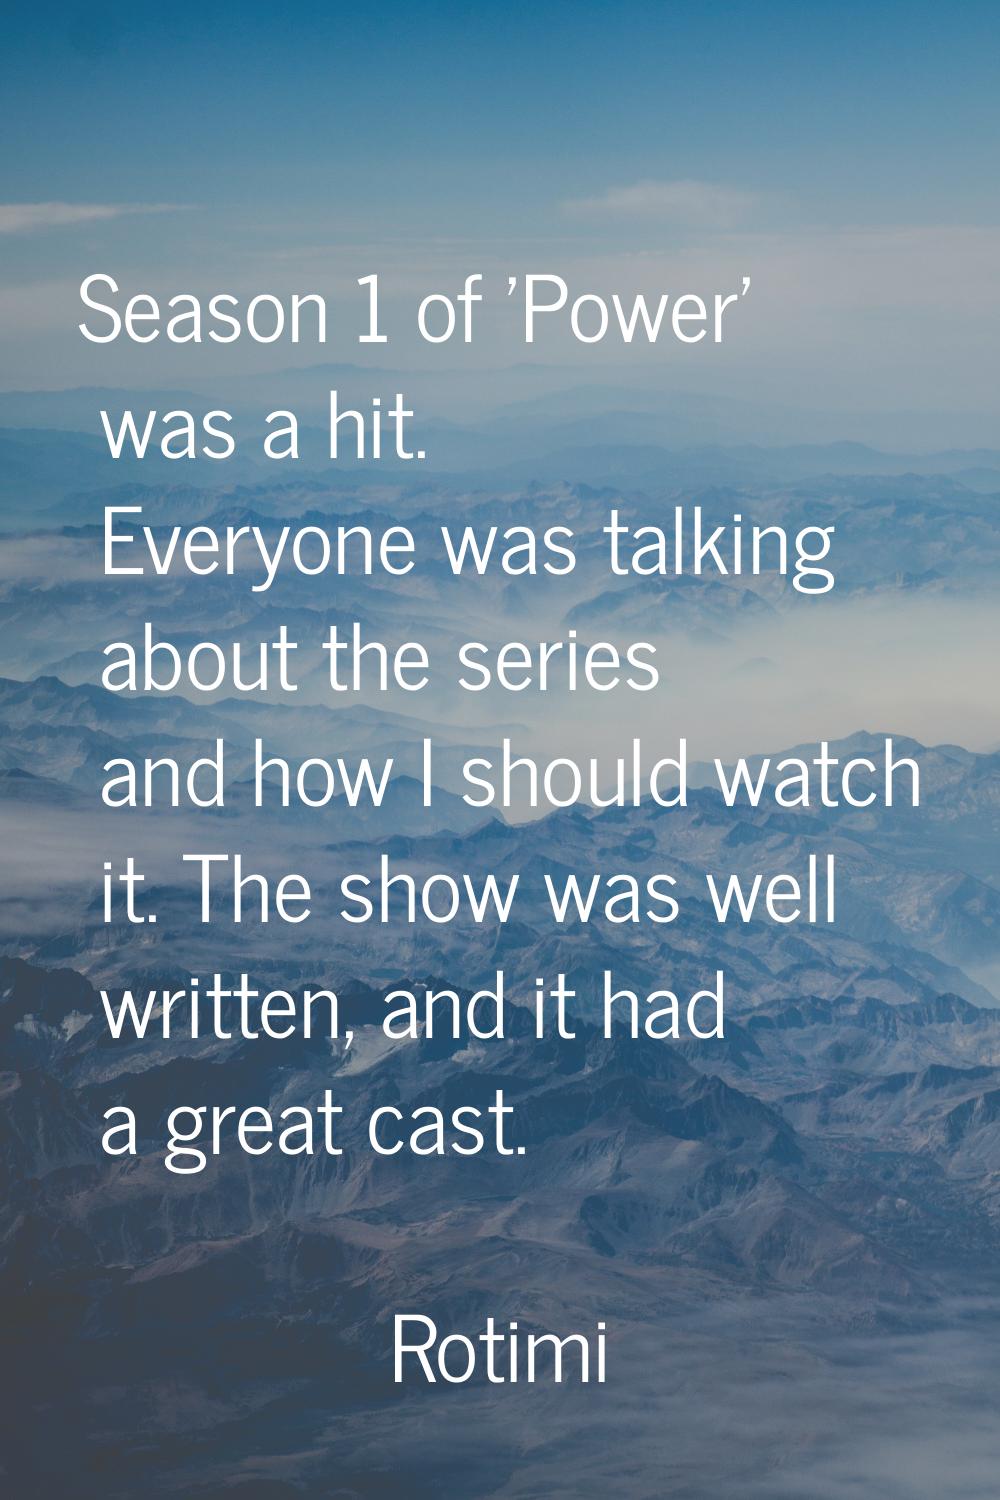 Season 1 of 'Power' was a hit. Everyone was talking about the series and how I should watch it. The